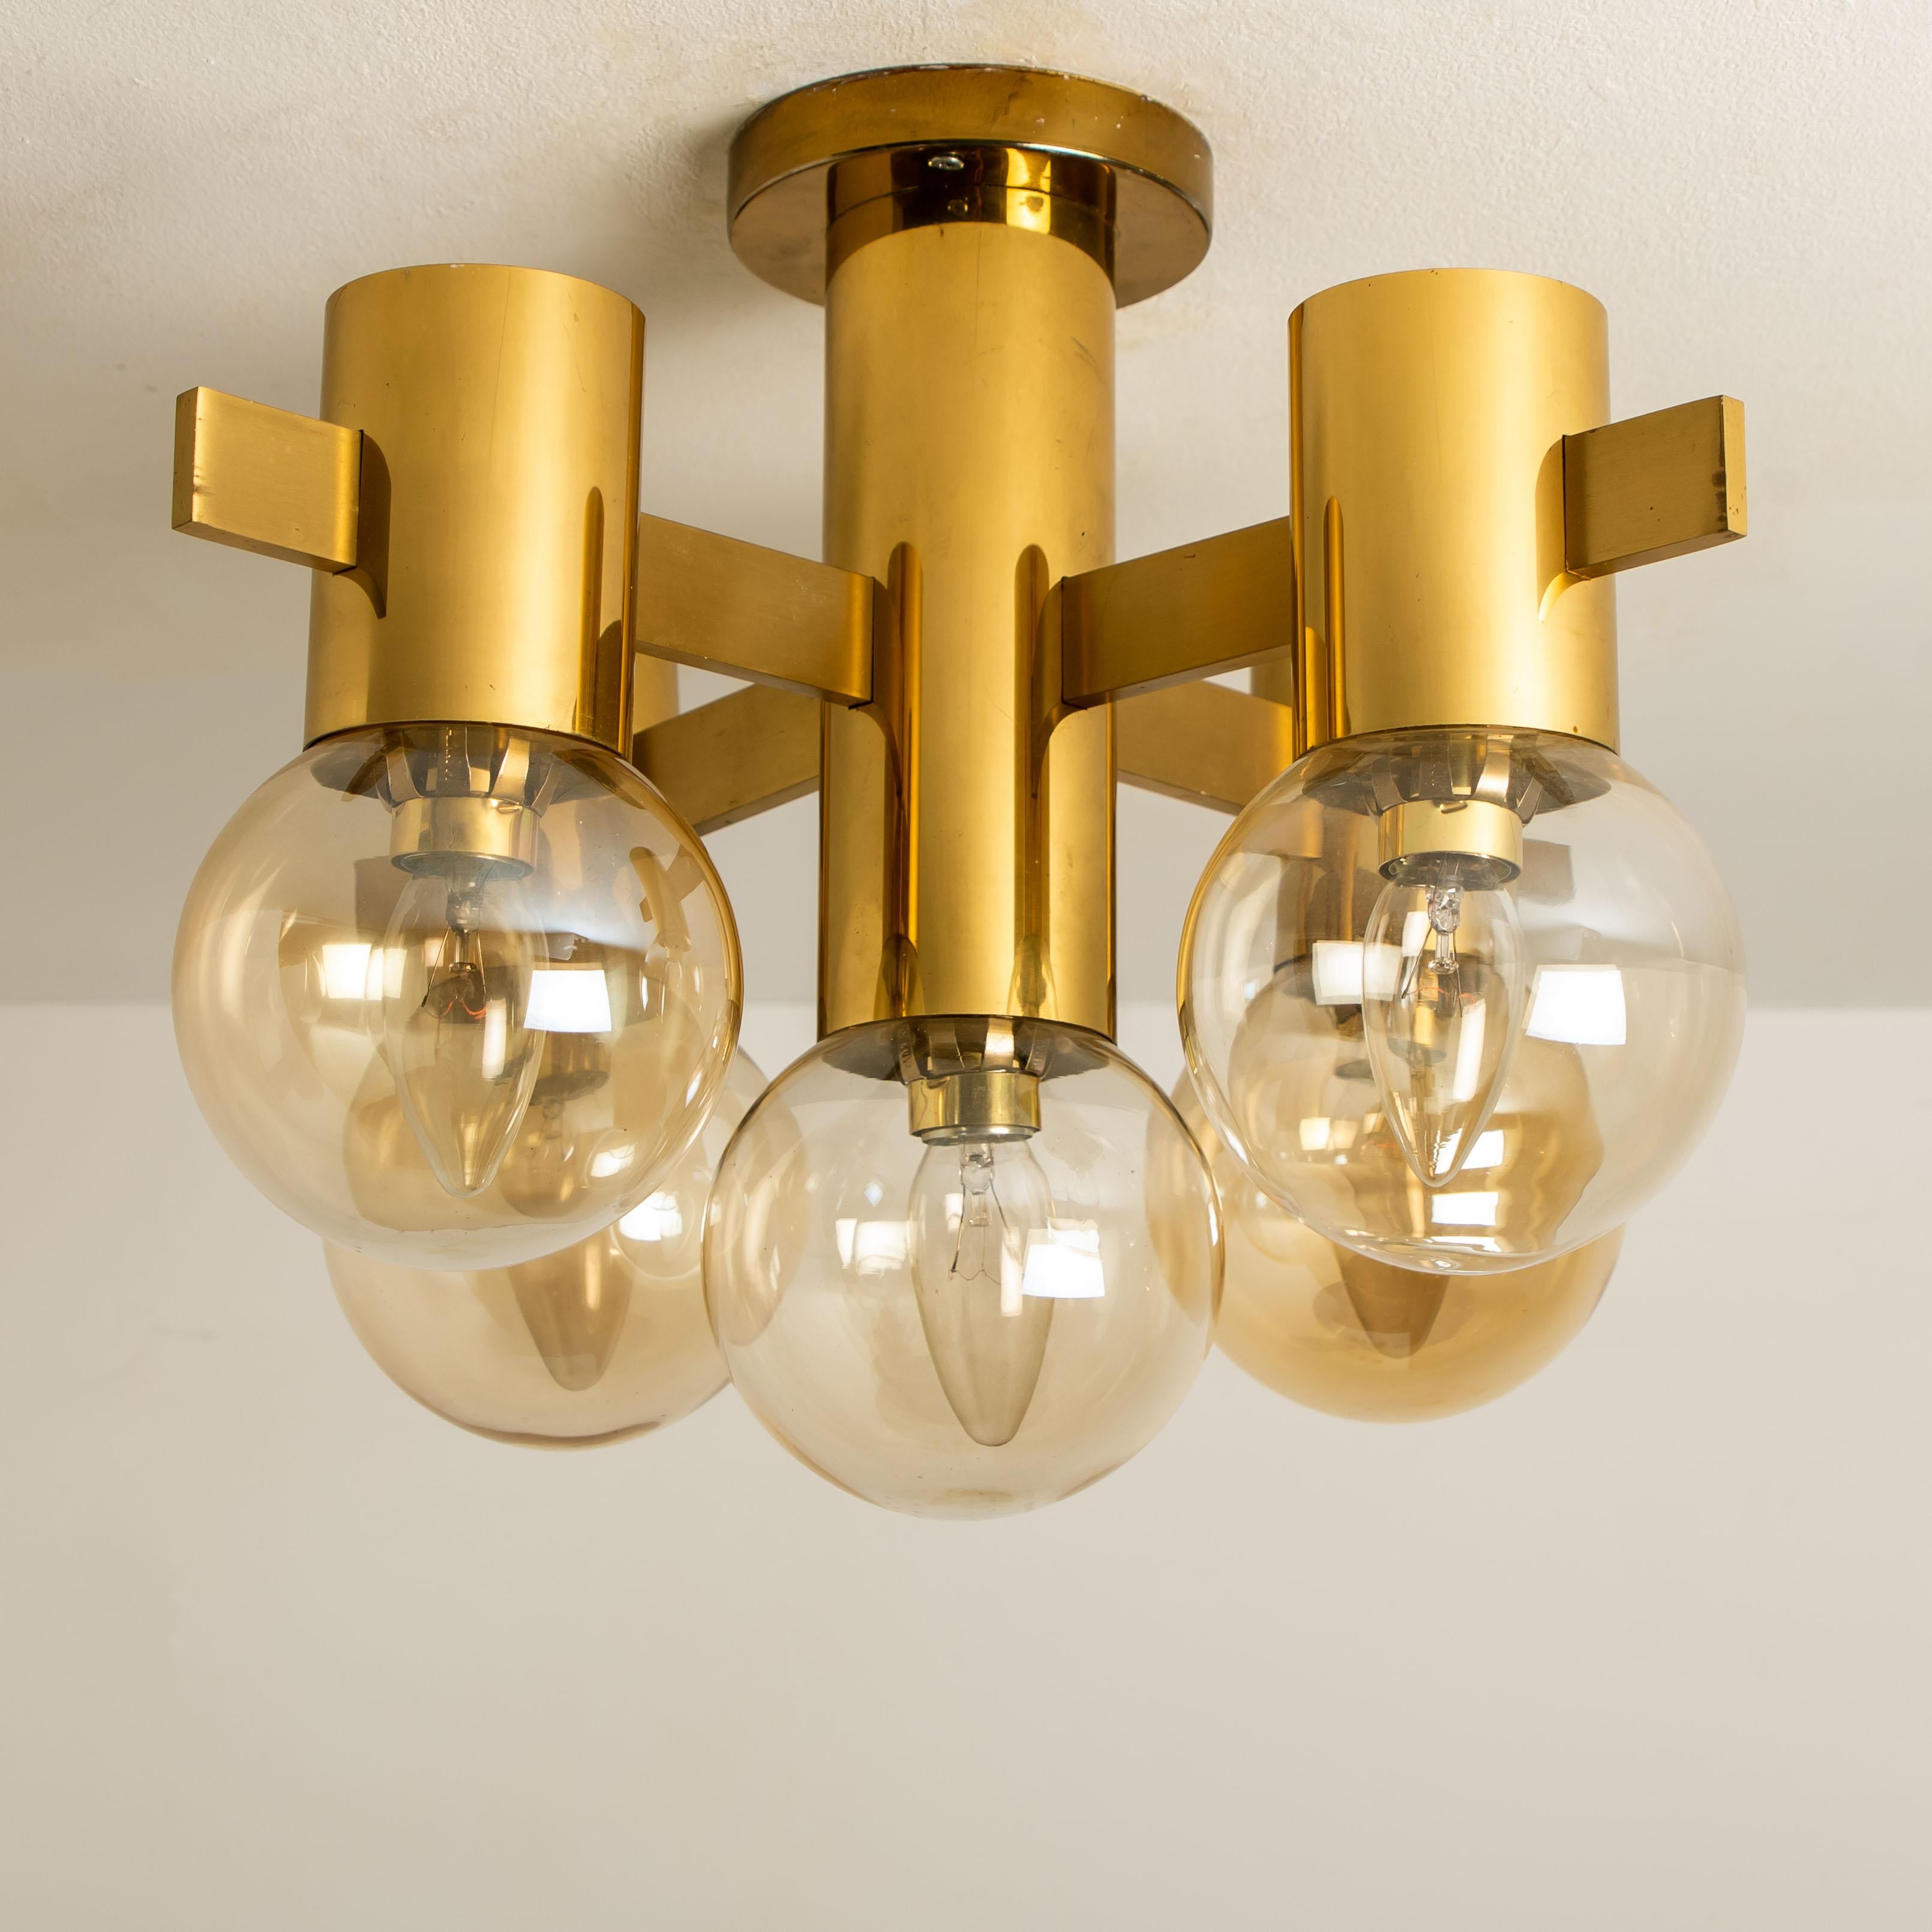 Set of Three Brass and Glass Light Fixtures in the Style of Jakobsson, 1960s For Sale 3